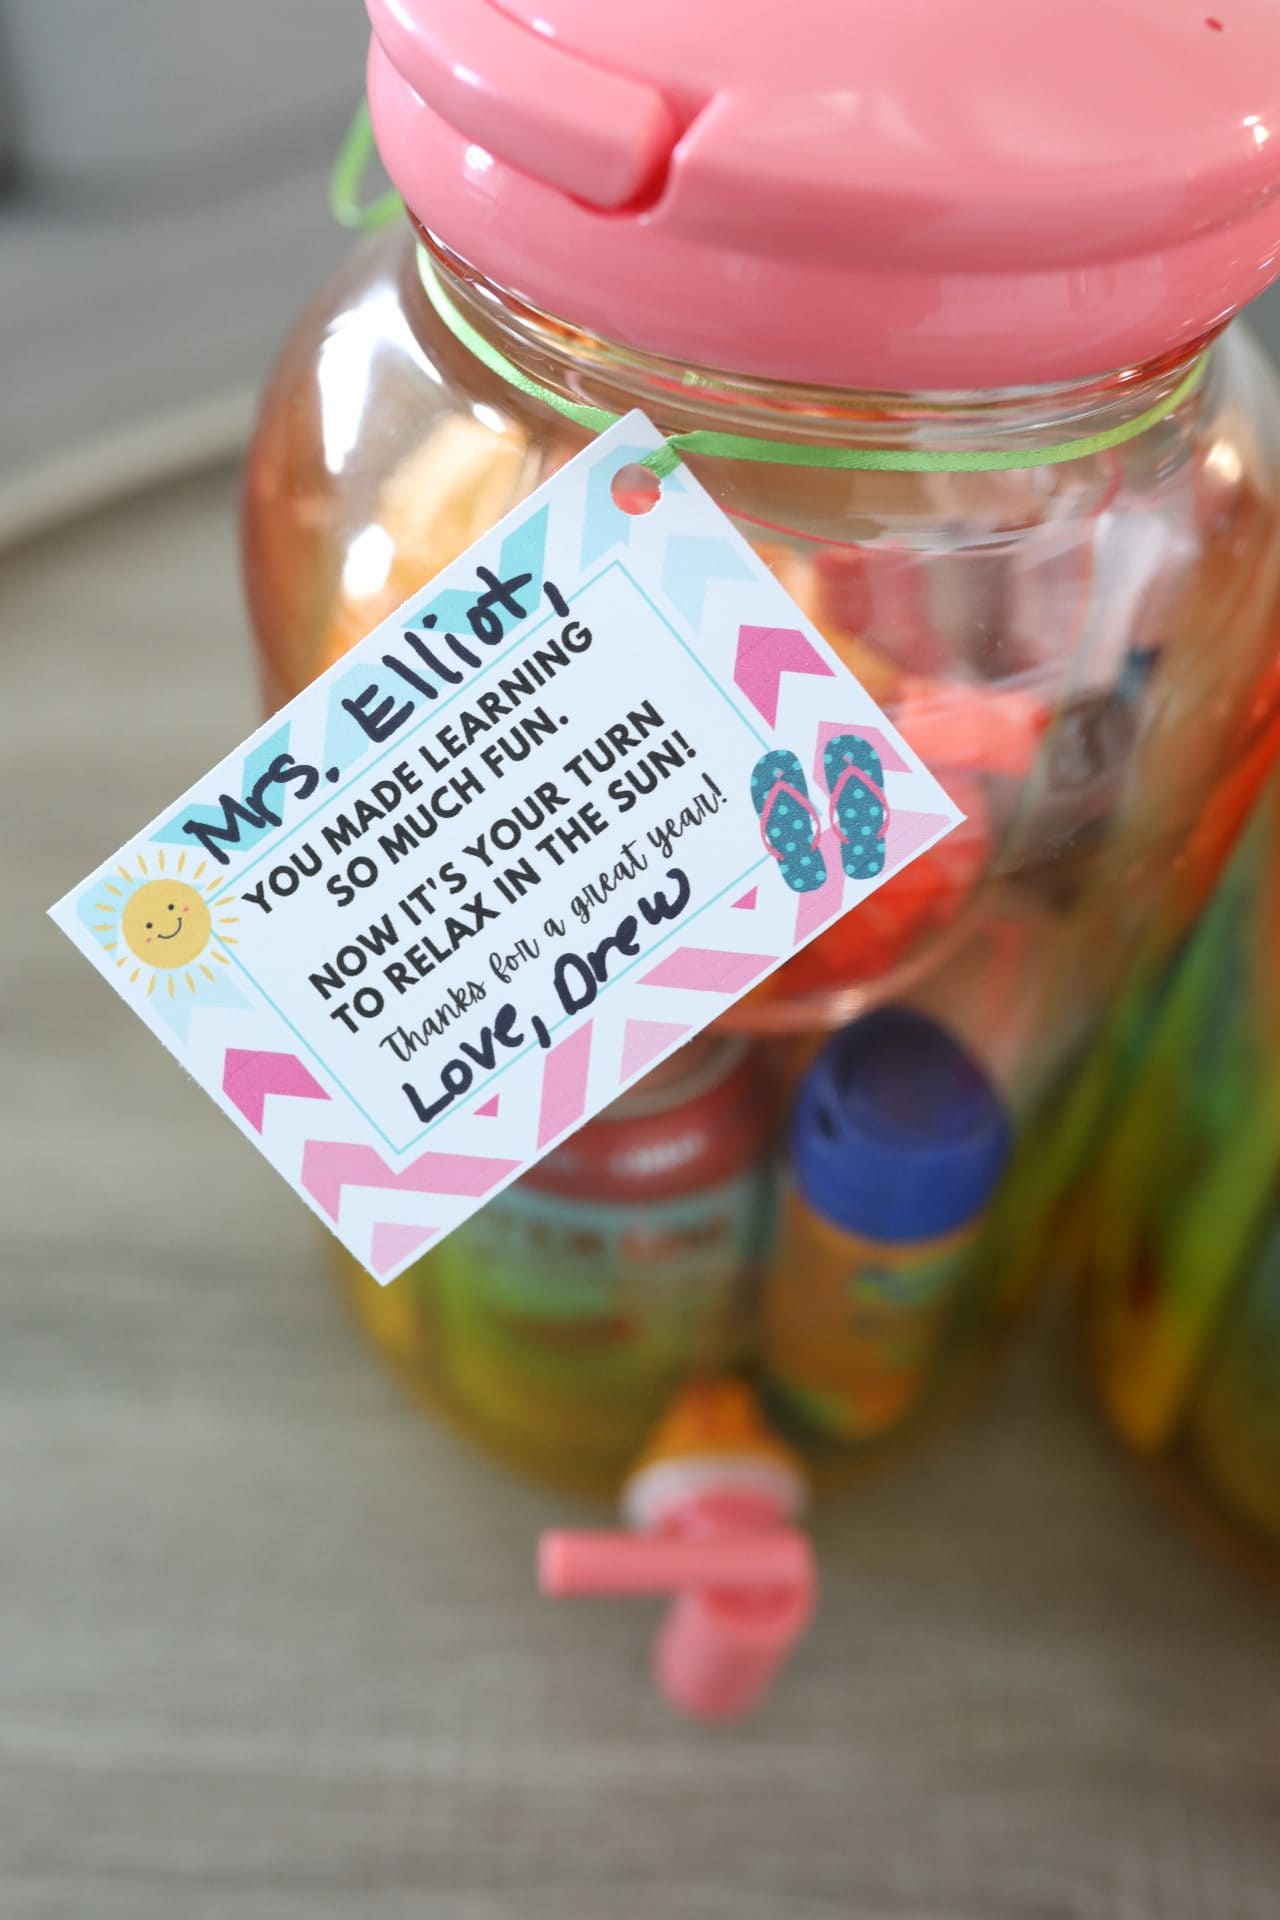 15+ New And Exciting Homemade Gifts For Teachers | The DIY Mommy